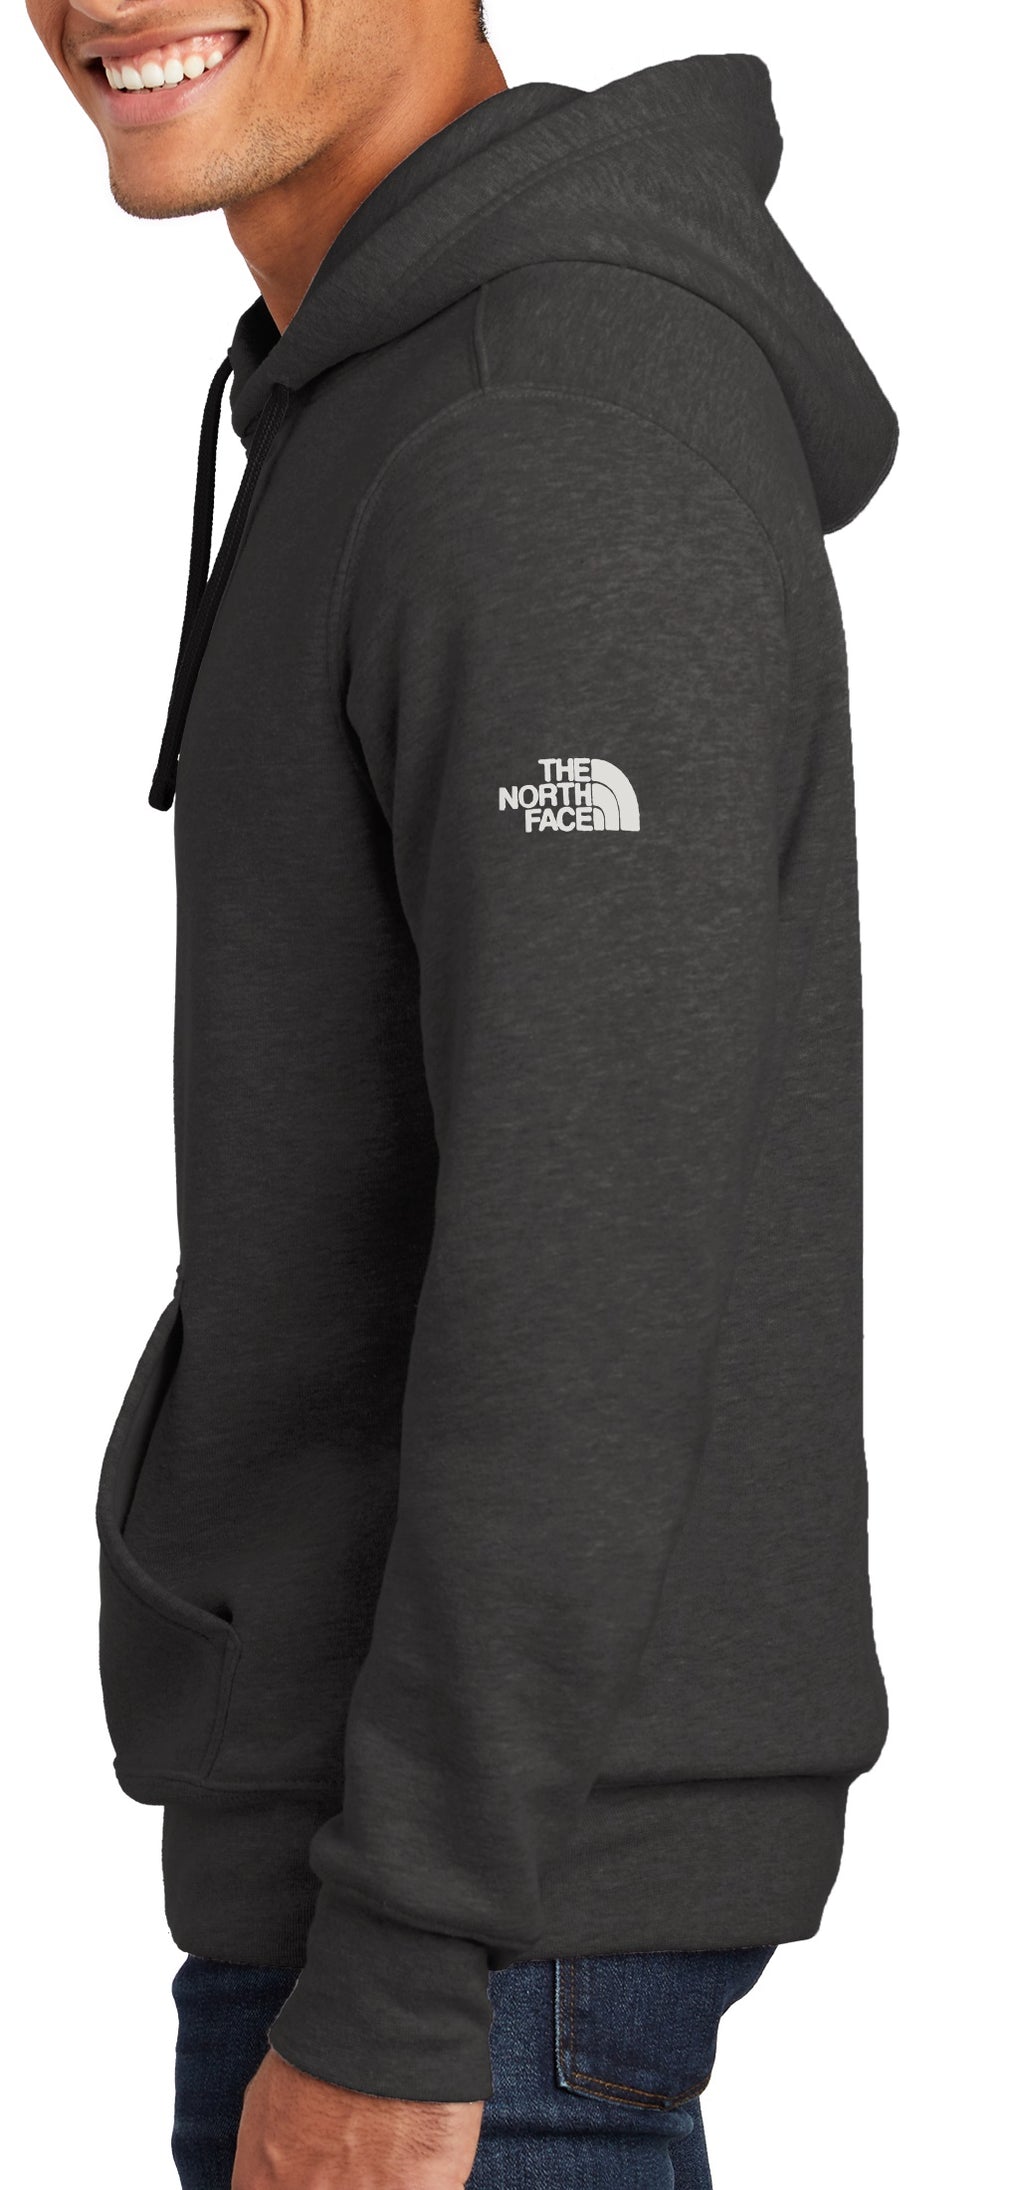 The North Face [NF0A47FF] Pullover Hoodie. Live Chat For Bulk